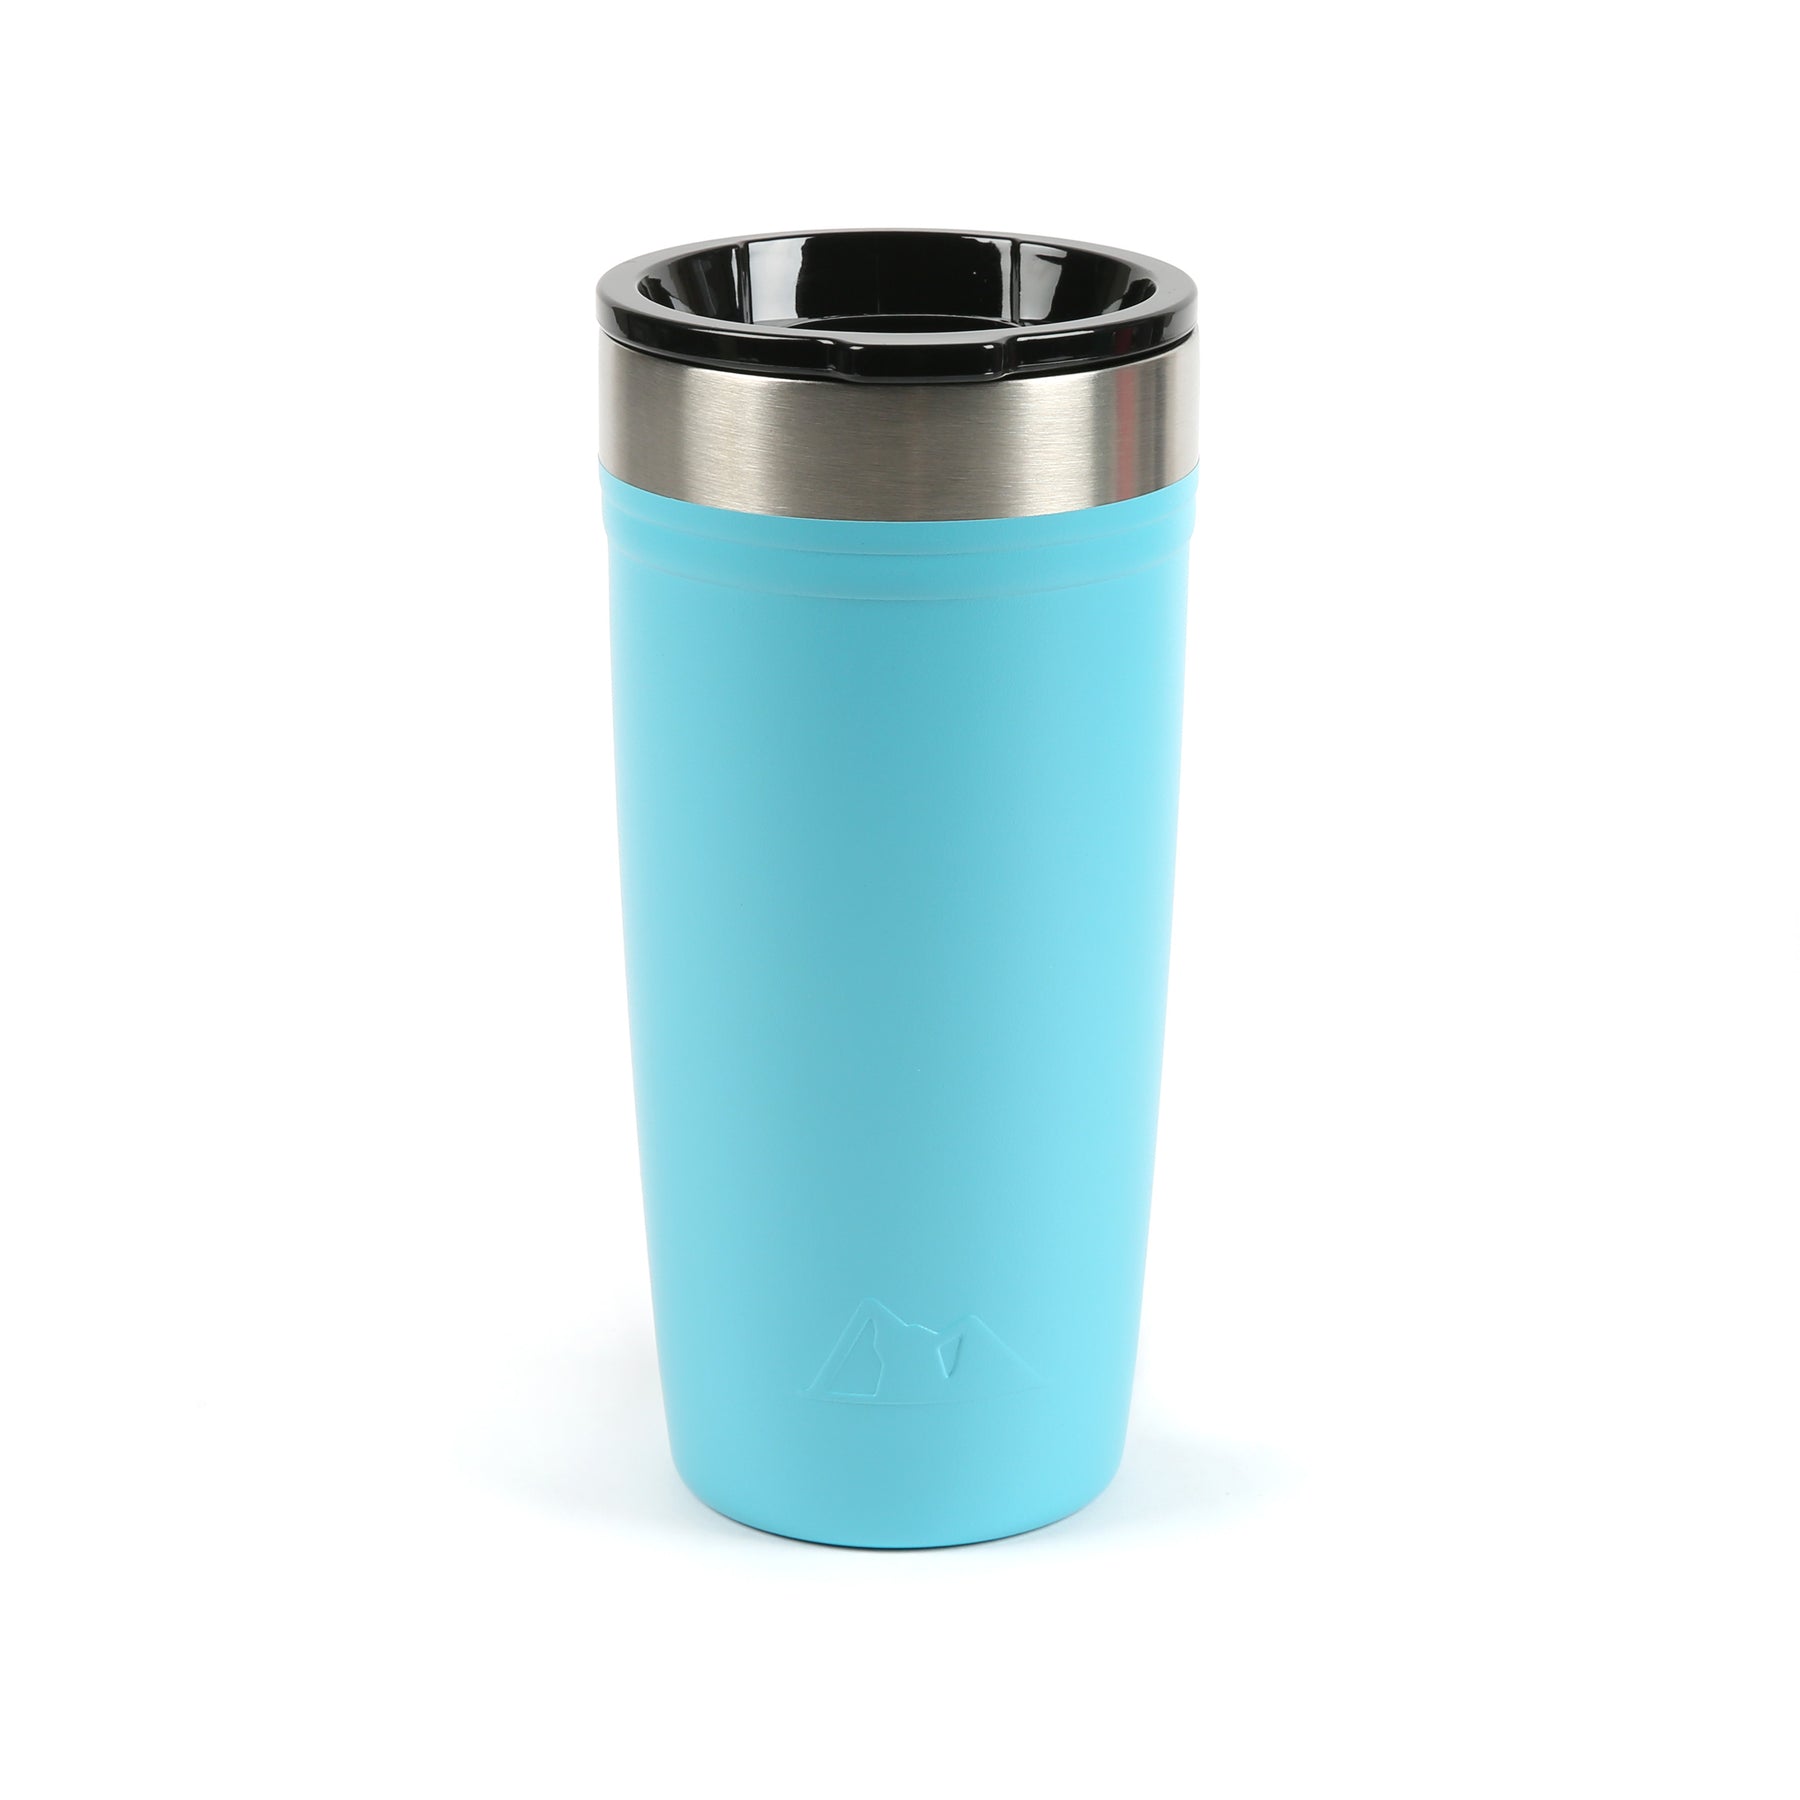 This tumbler will not spill water if you happen to knock it down